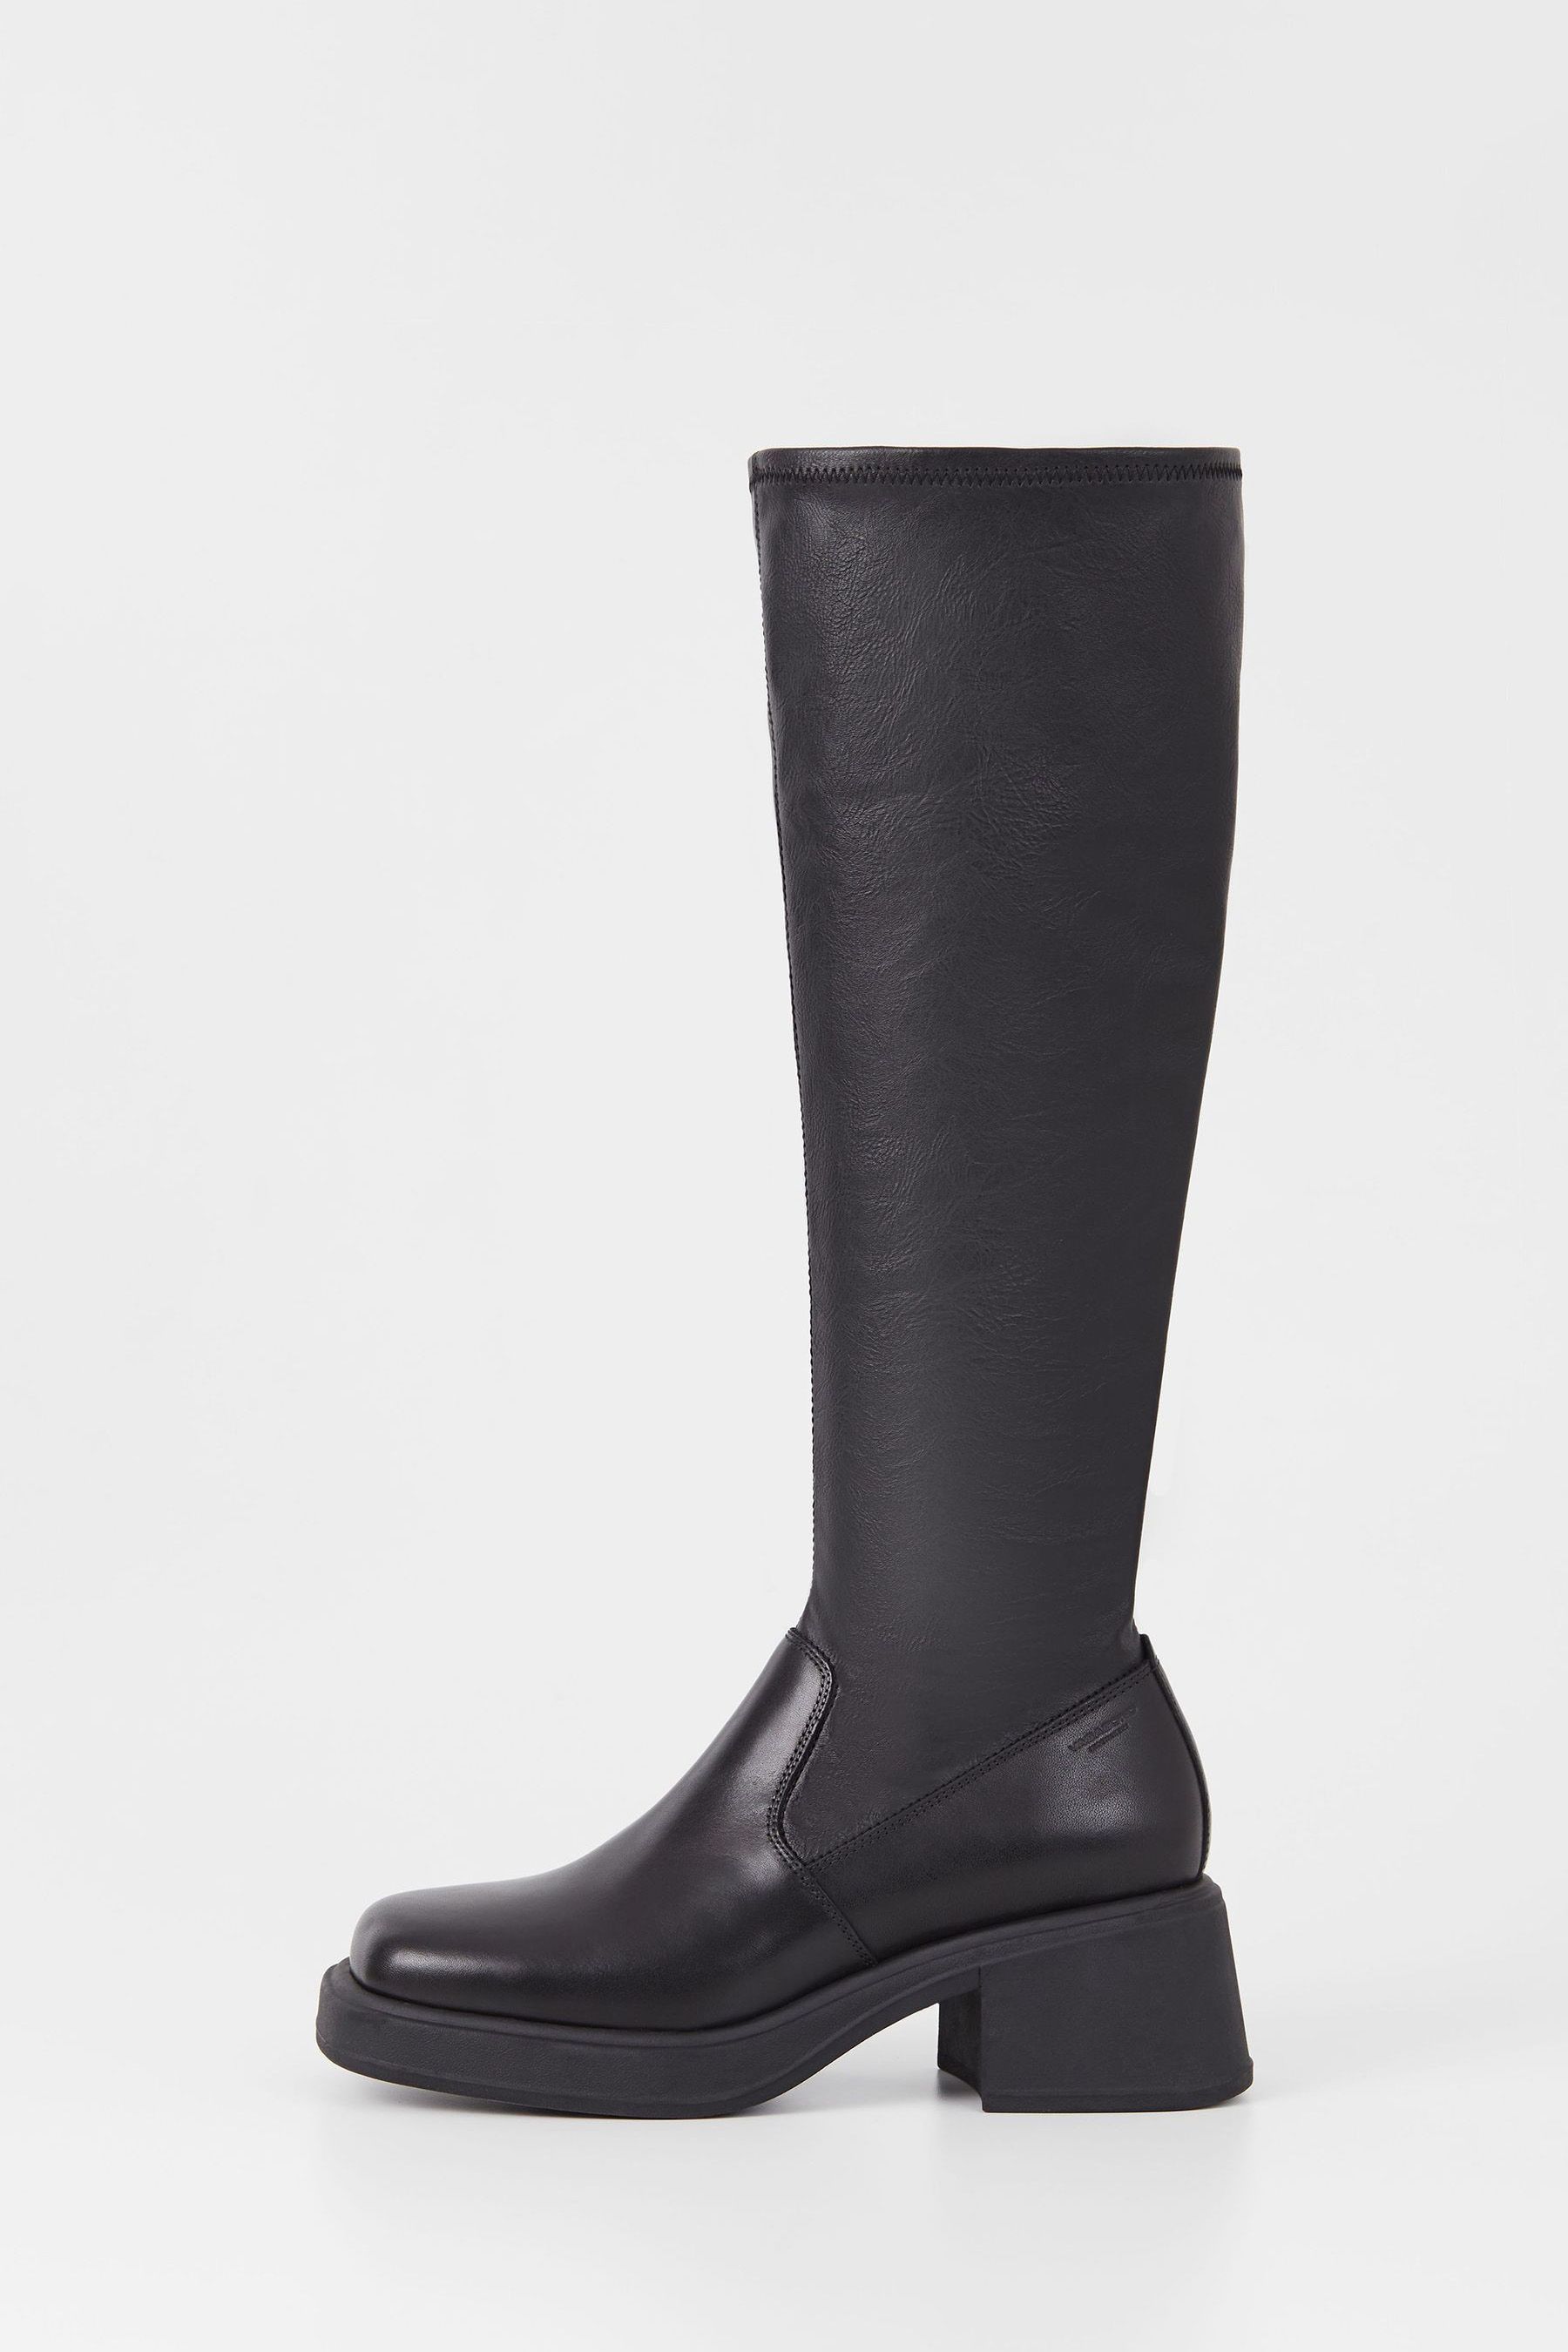 Buy Vagabond Shoemakers Dorah Tall Stretch Black Boots from the Next UK ...